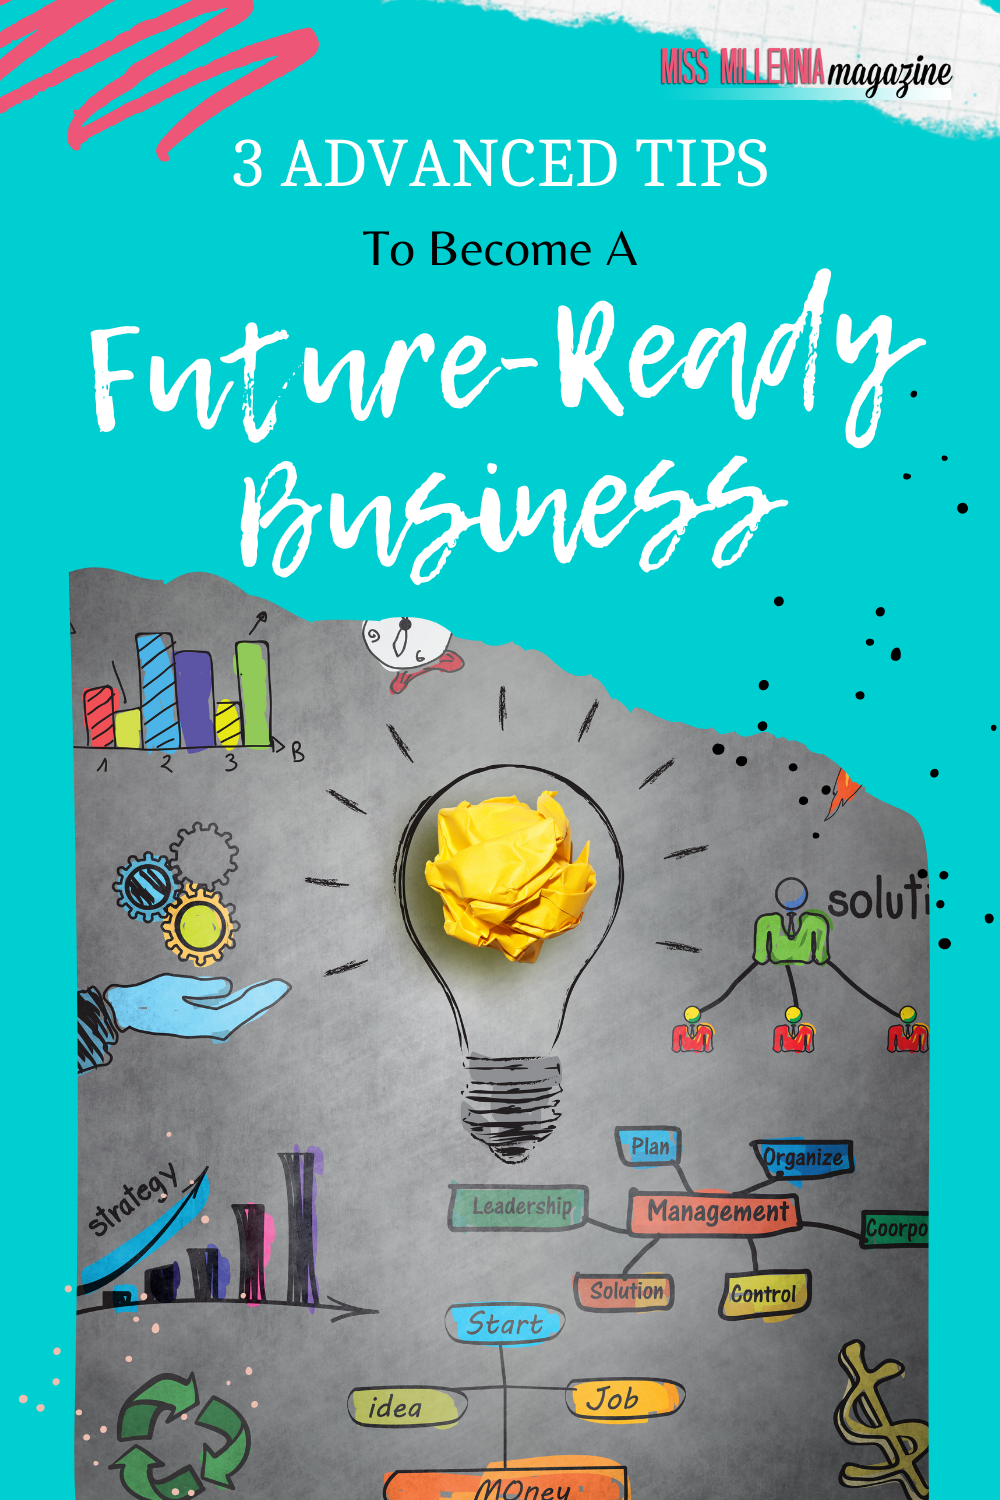 3 Advanced Tips To Become A Future-Ready Business